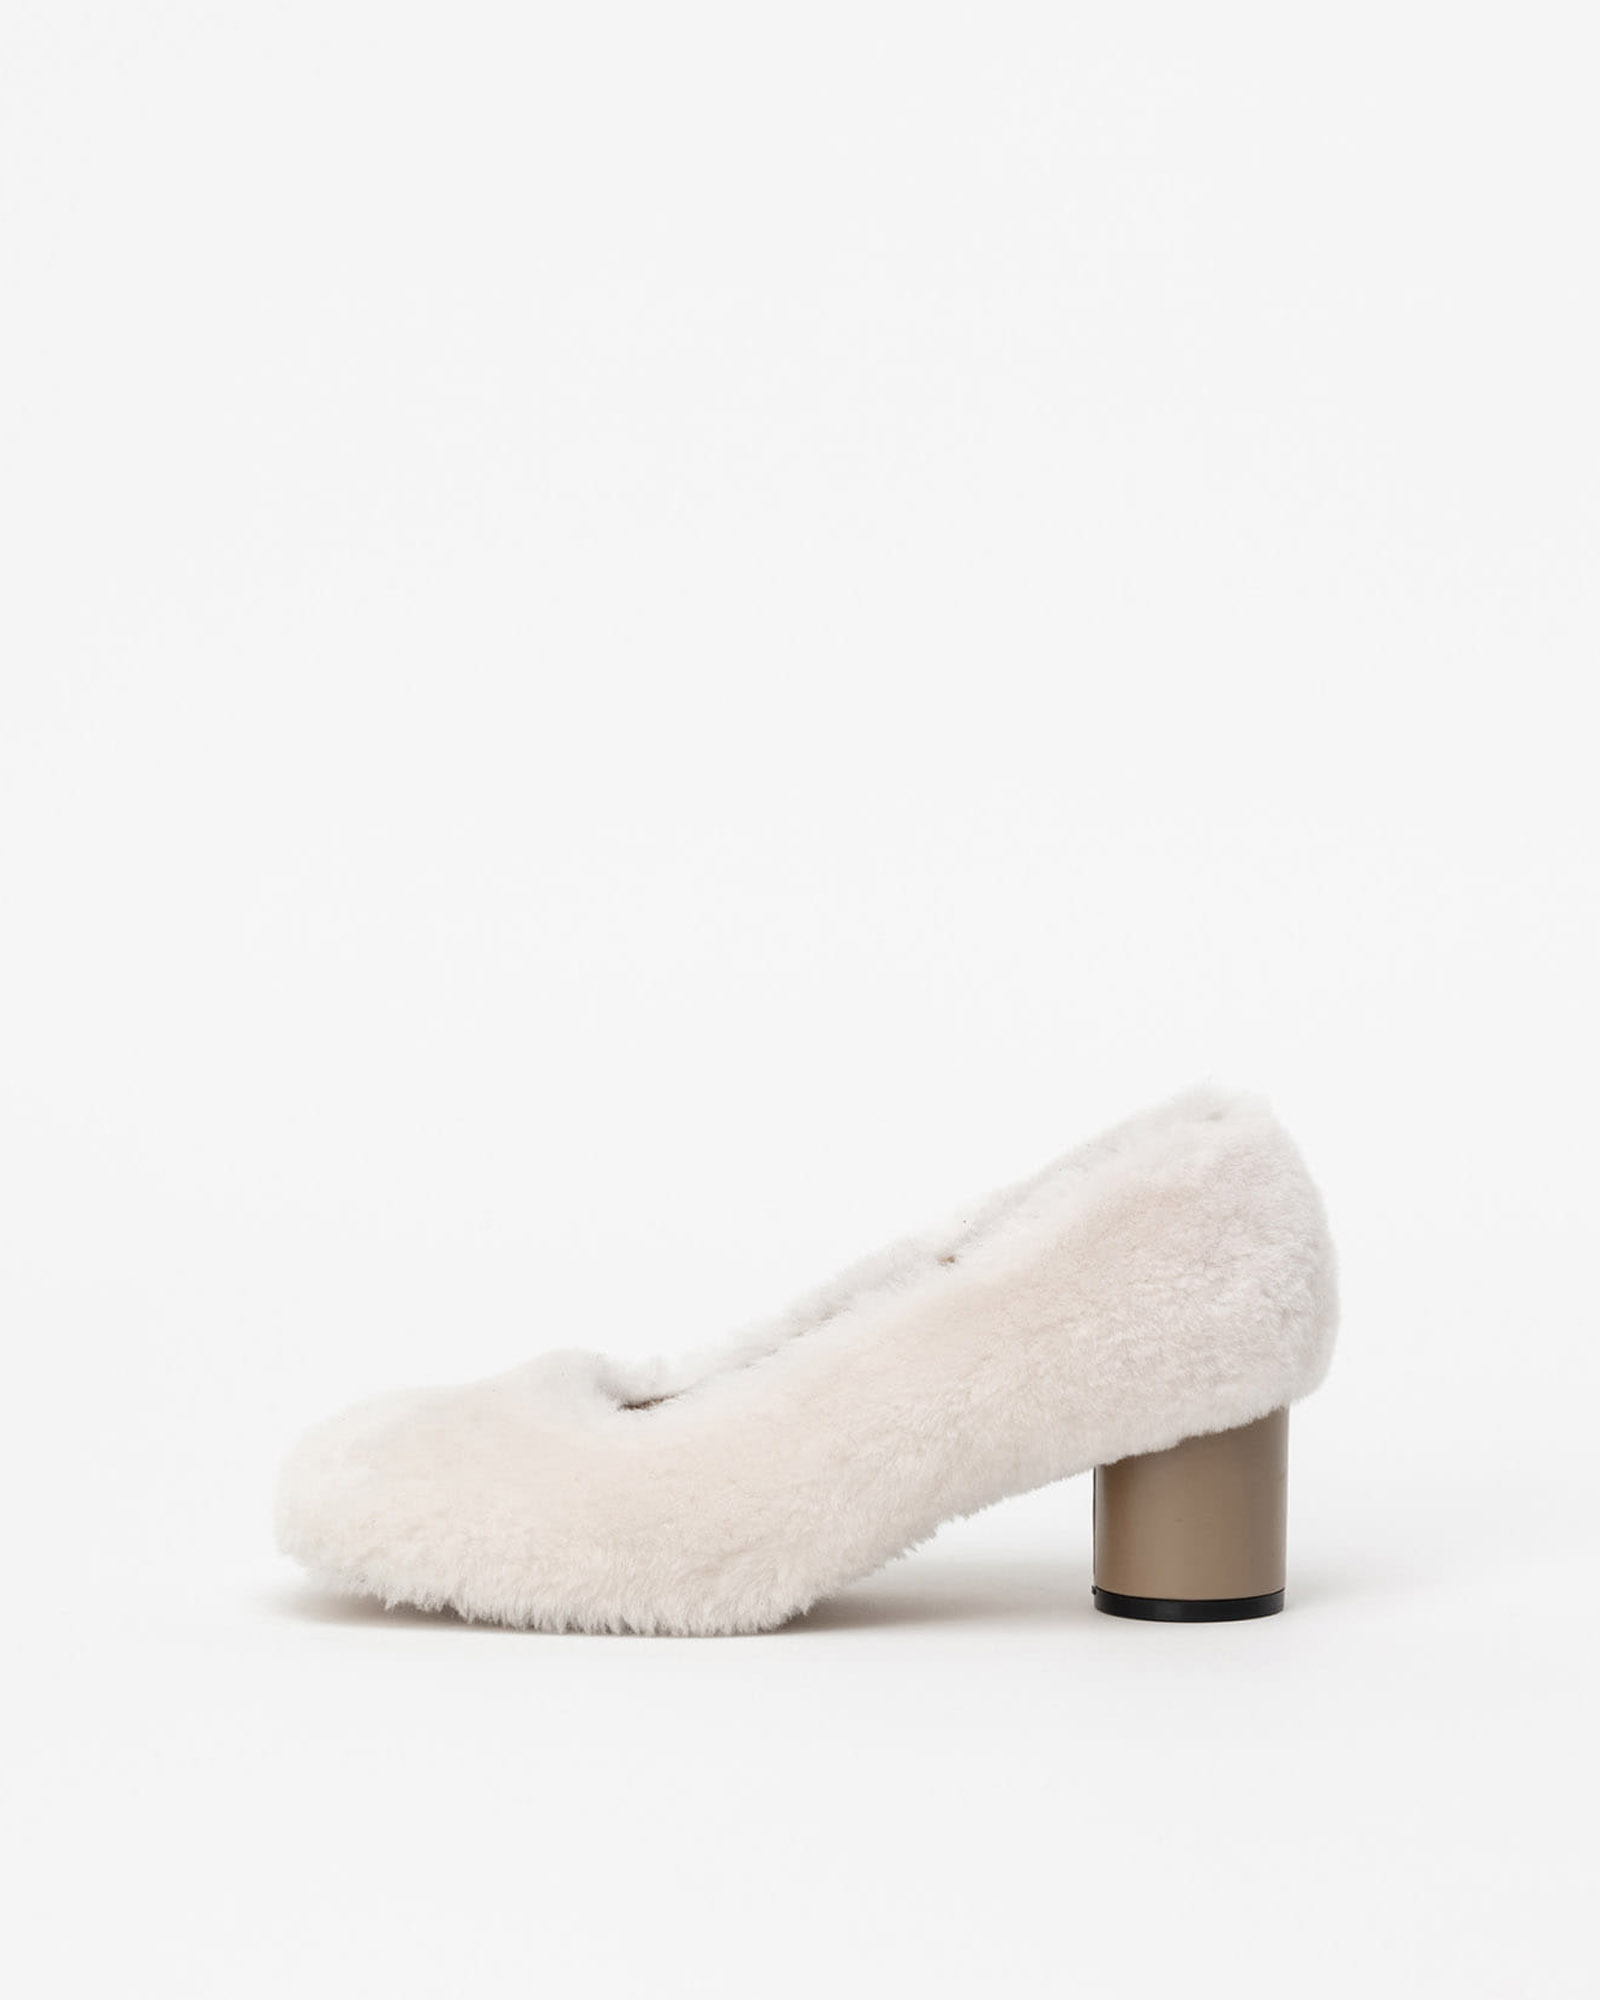 Brioso Shearling Pumps in Mink Ivory Fur with Textured Beige